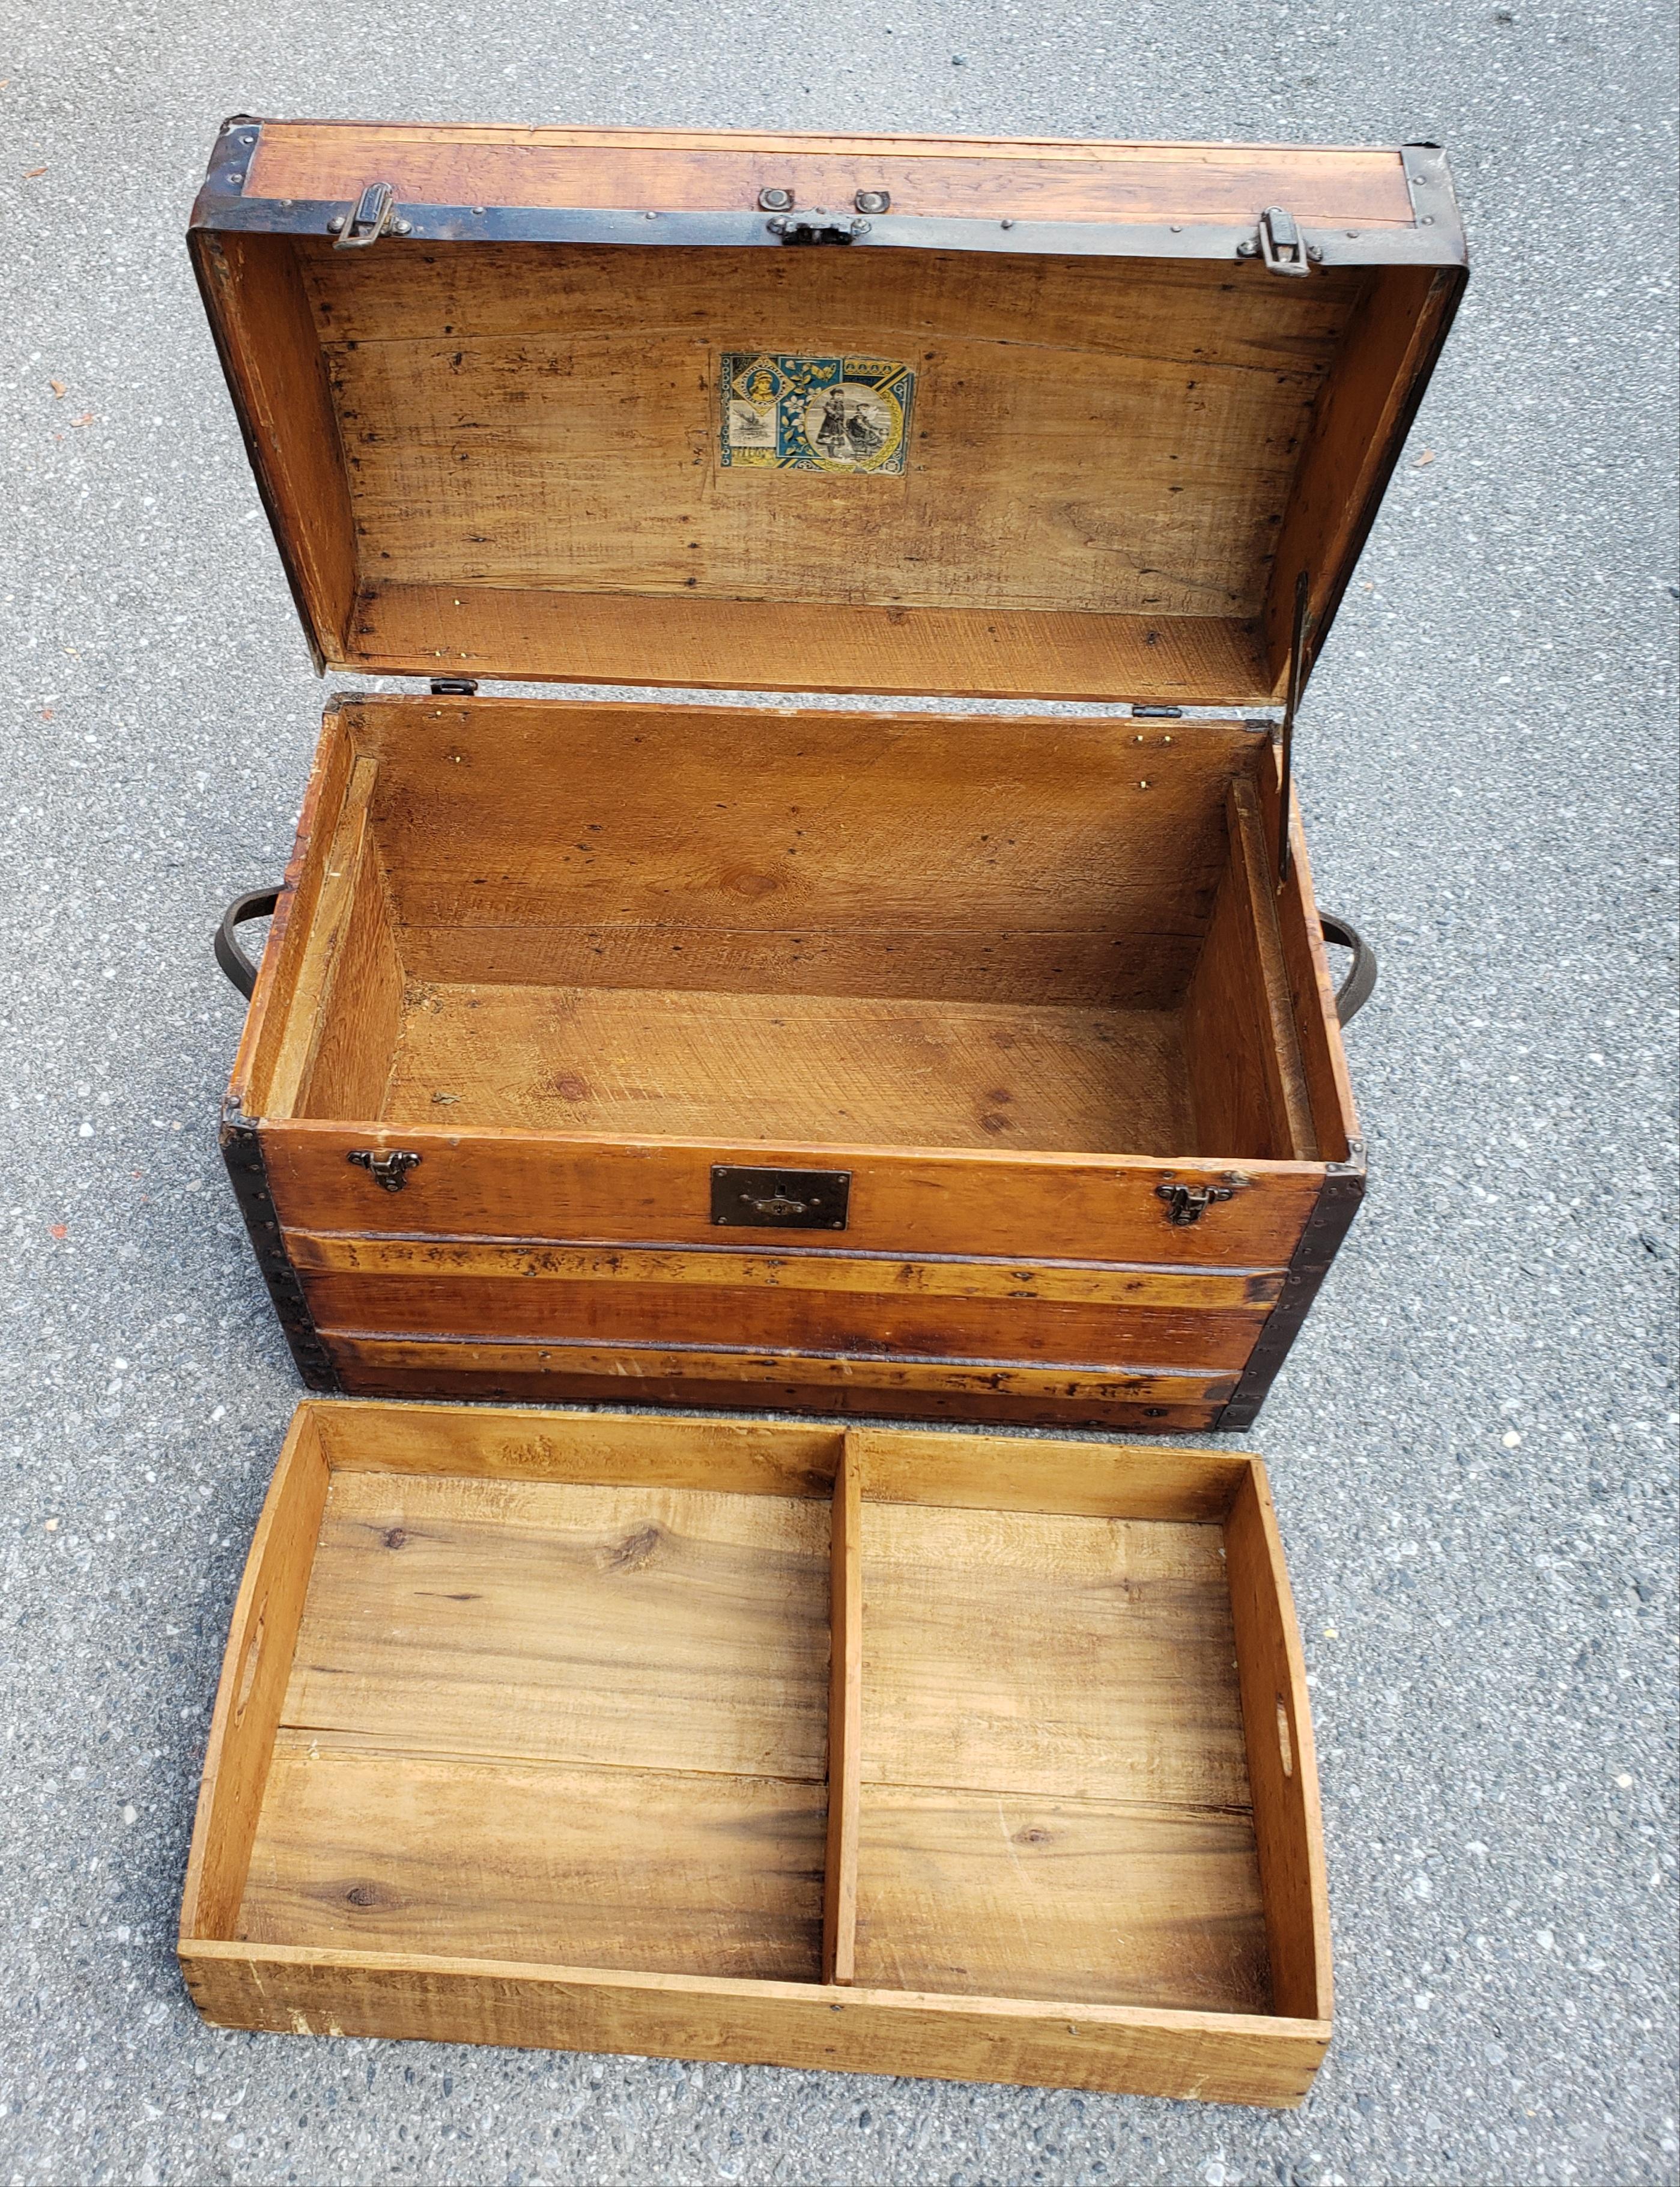 Early 20th Century Refinished American Rolling Pine Blanket Chest Storage Trunk For Sale 1